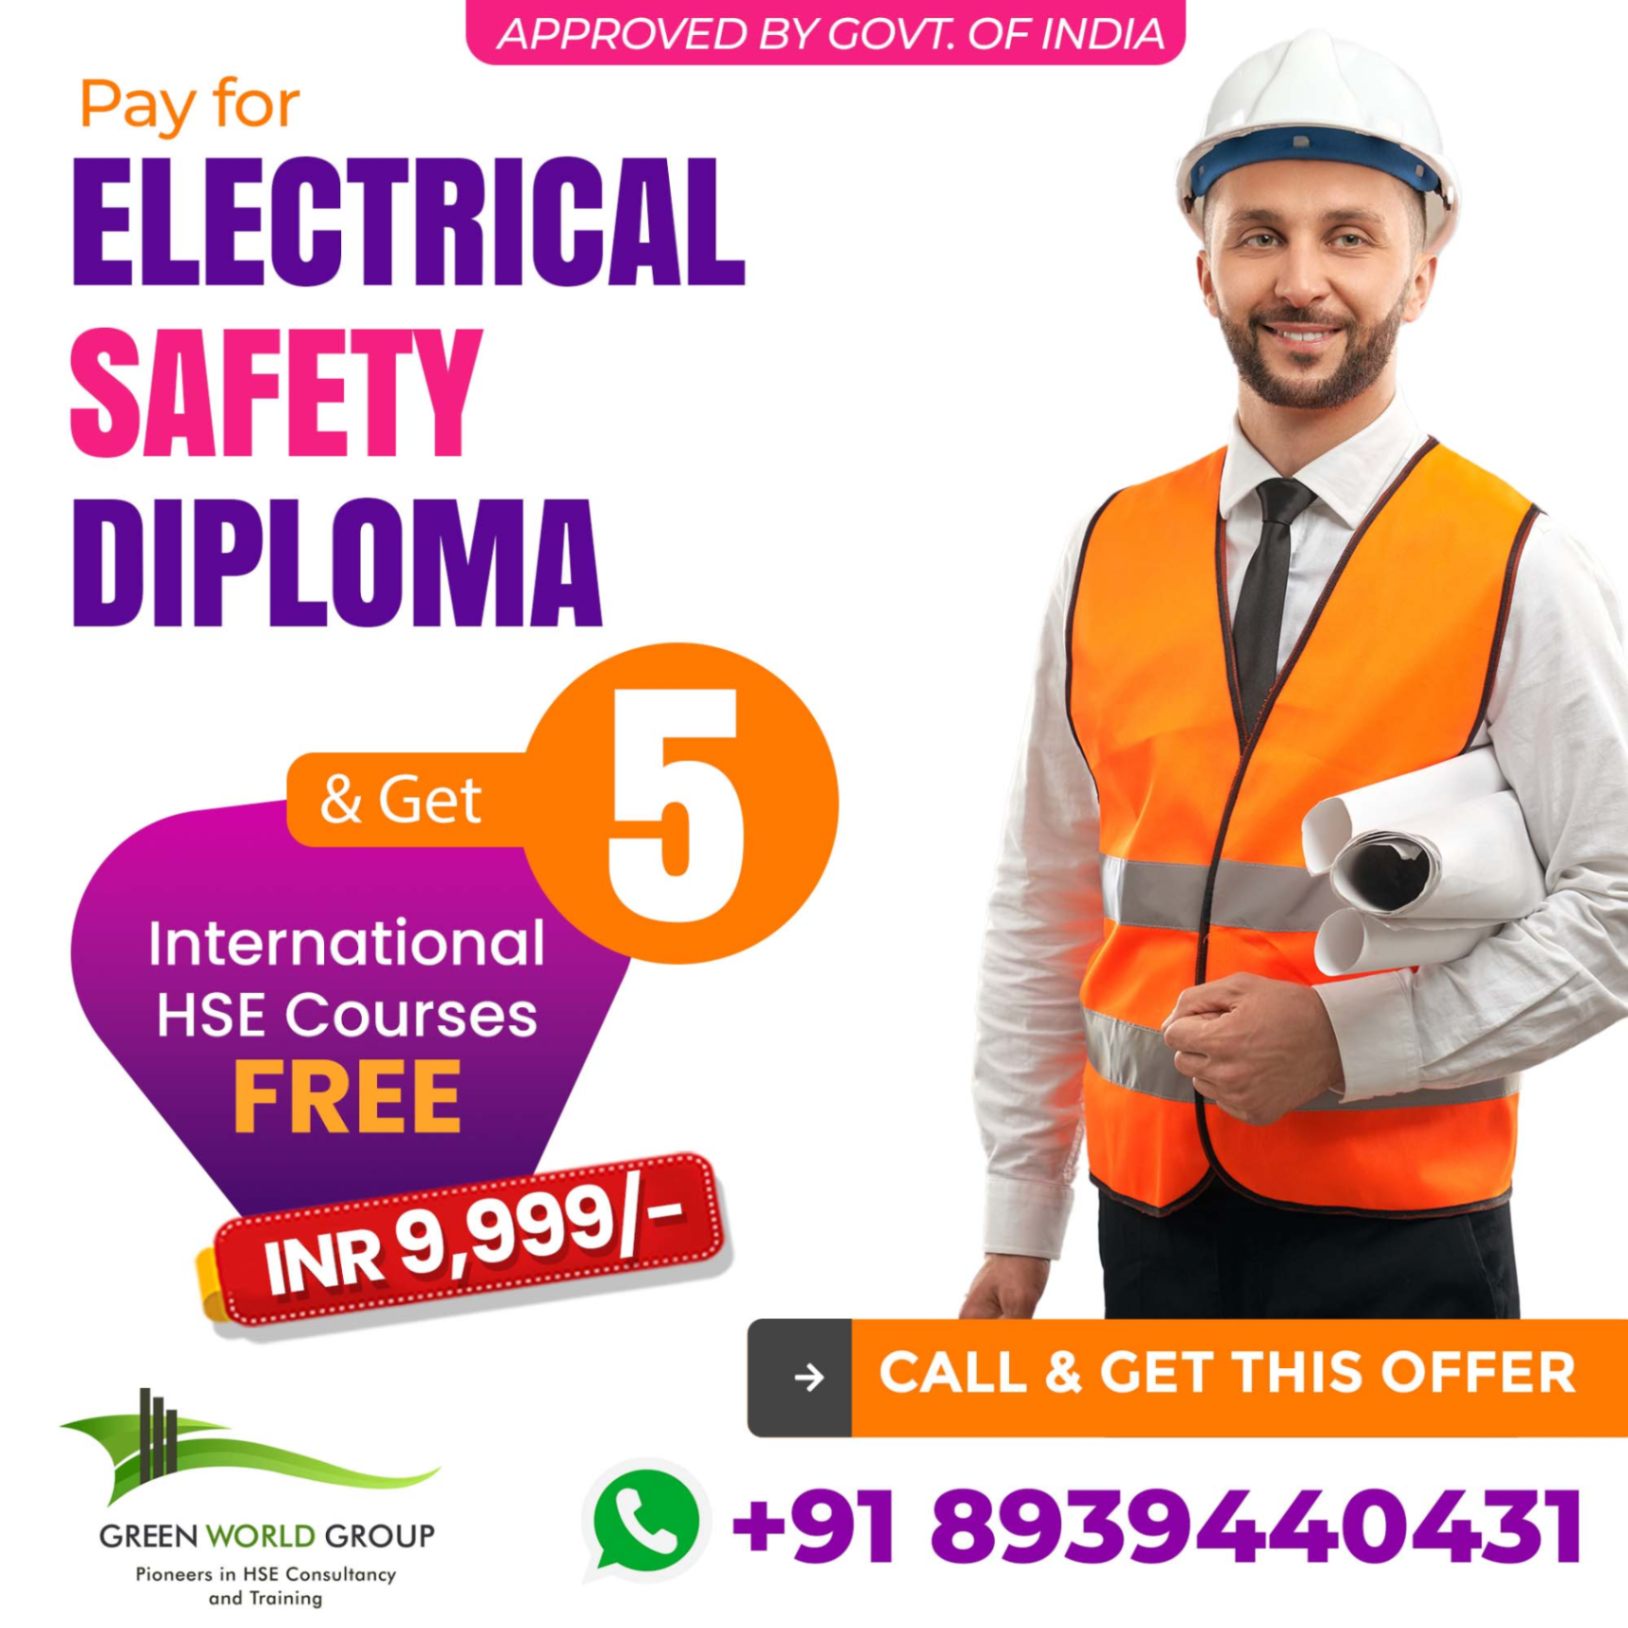 Electrical Safety Diploma Course in Chennai